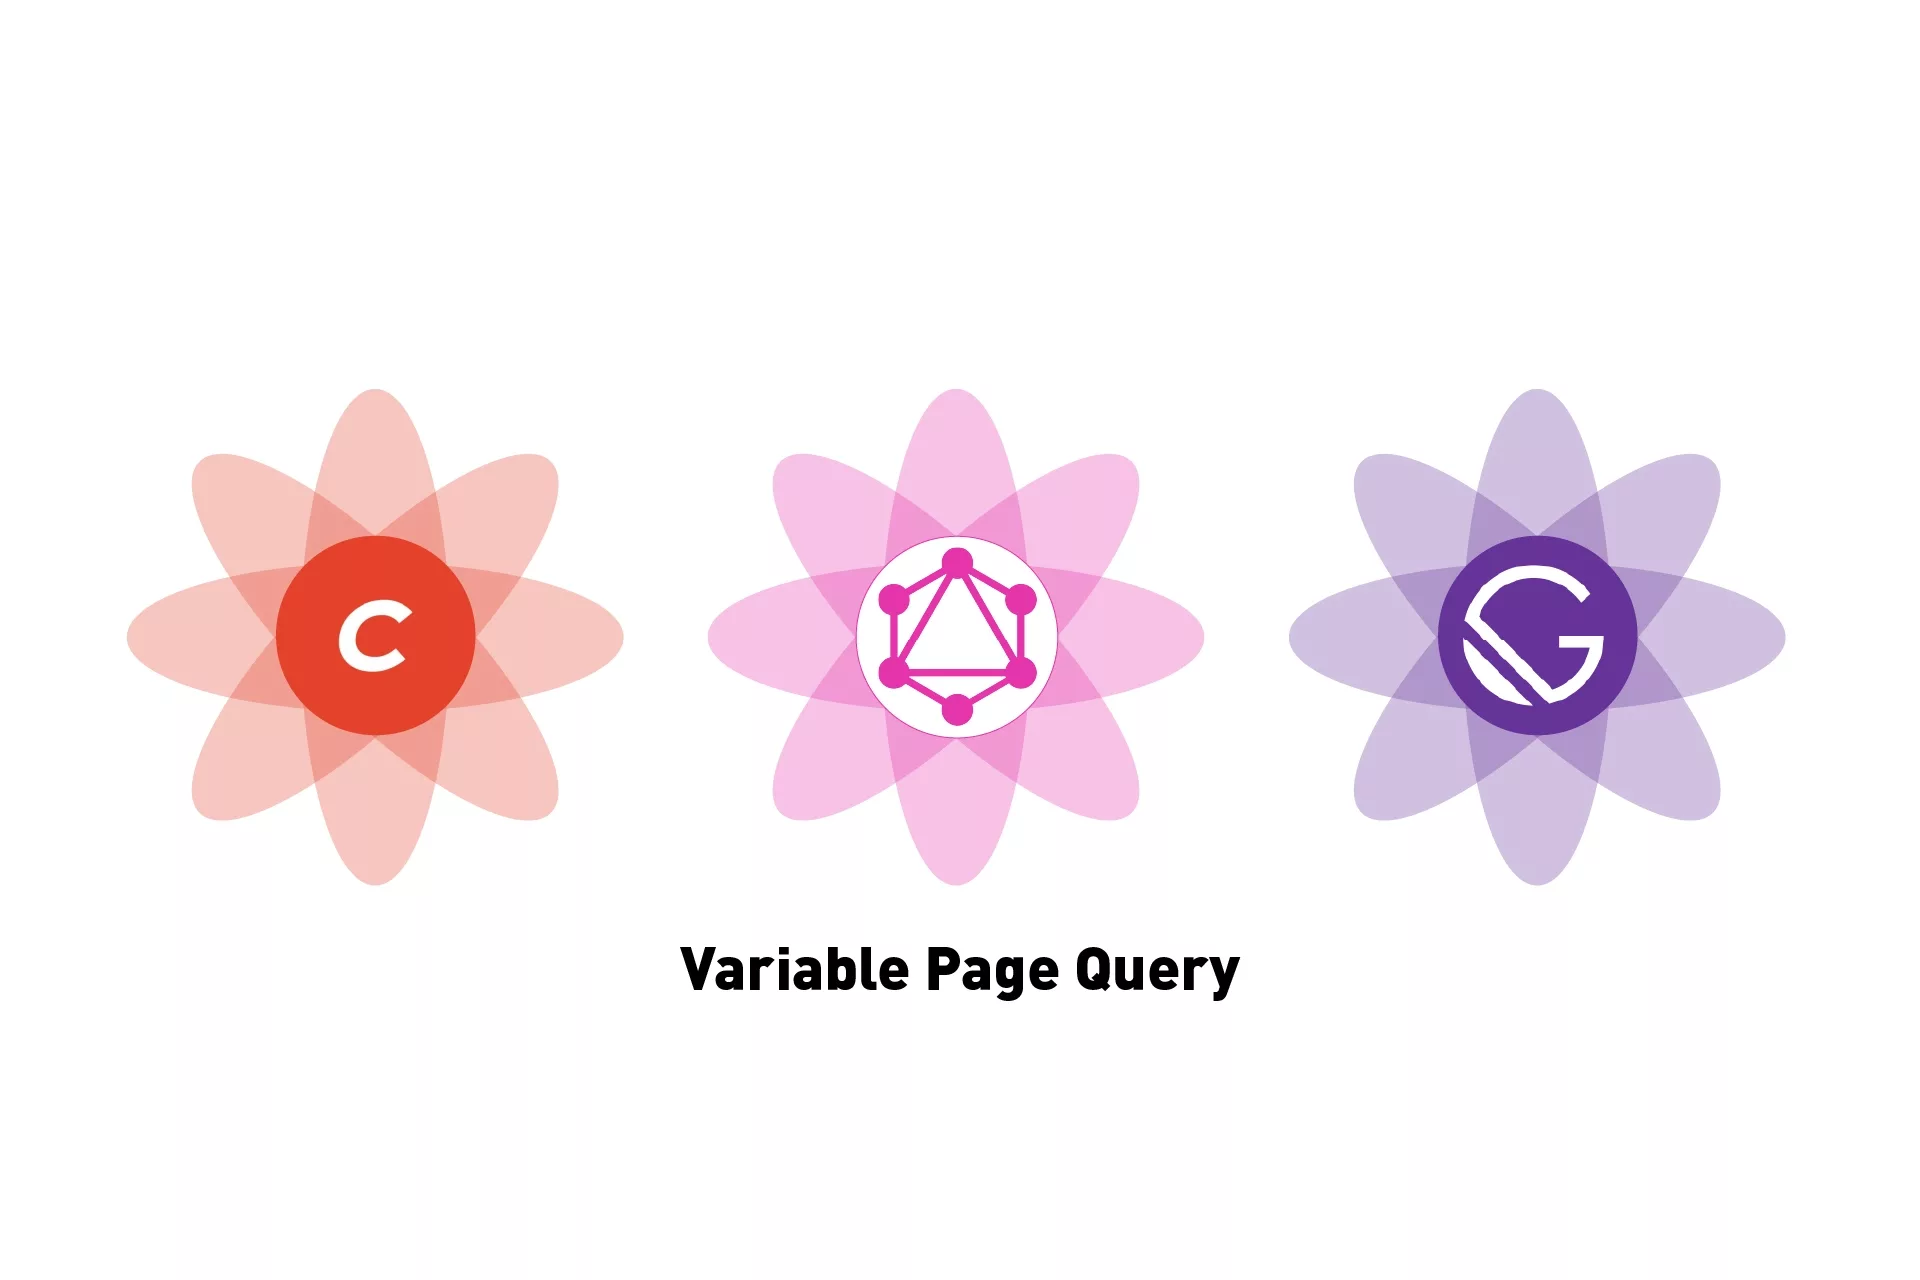 Three flowers that represent Craft CMS, GraphQL and GatsbyJS with the text 'Variable Page Query' beneath it.